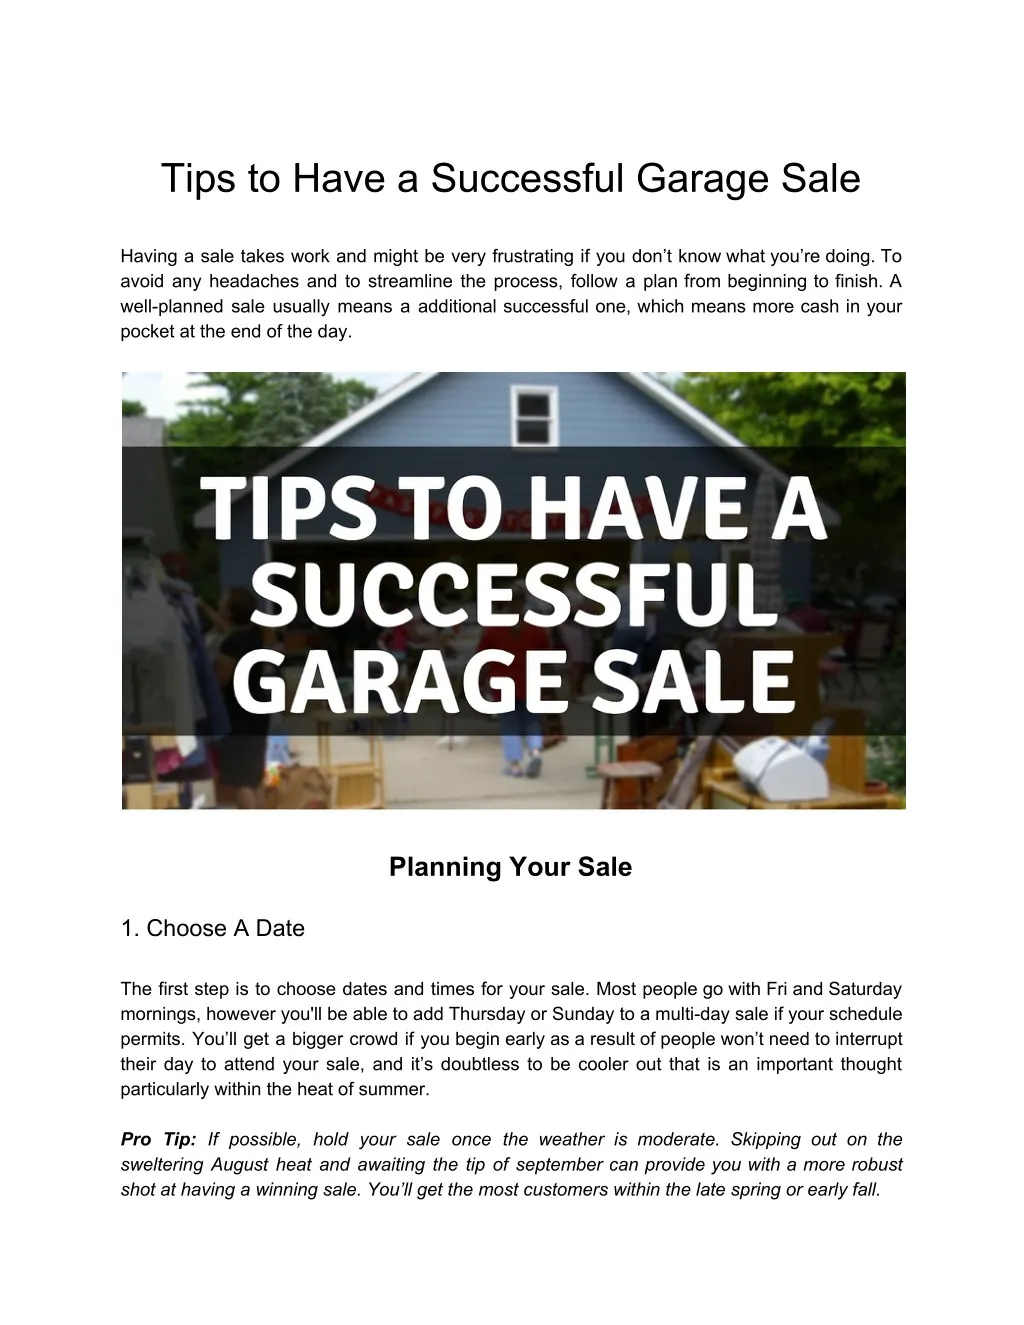 tips to have a successful garage sale